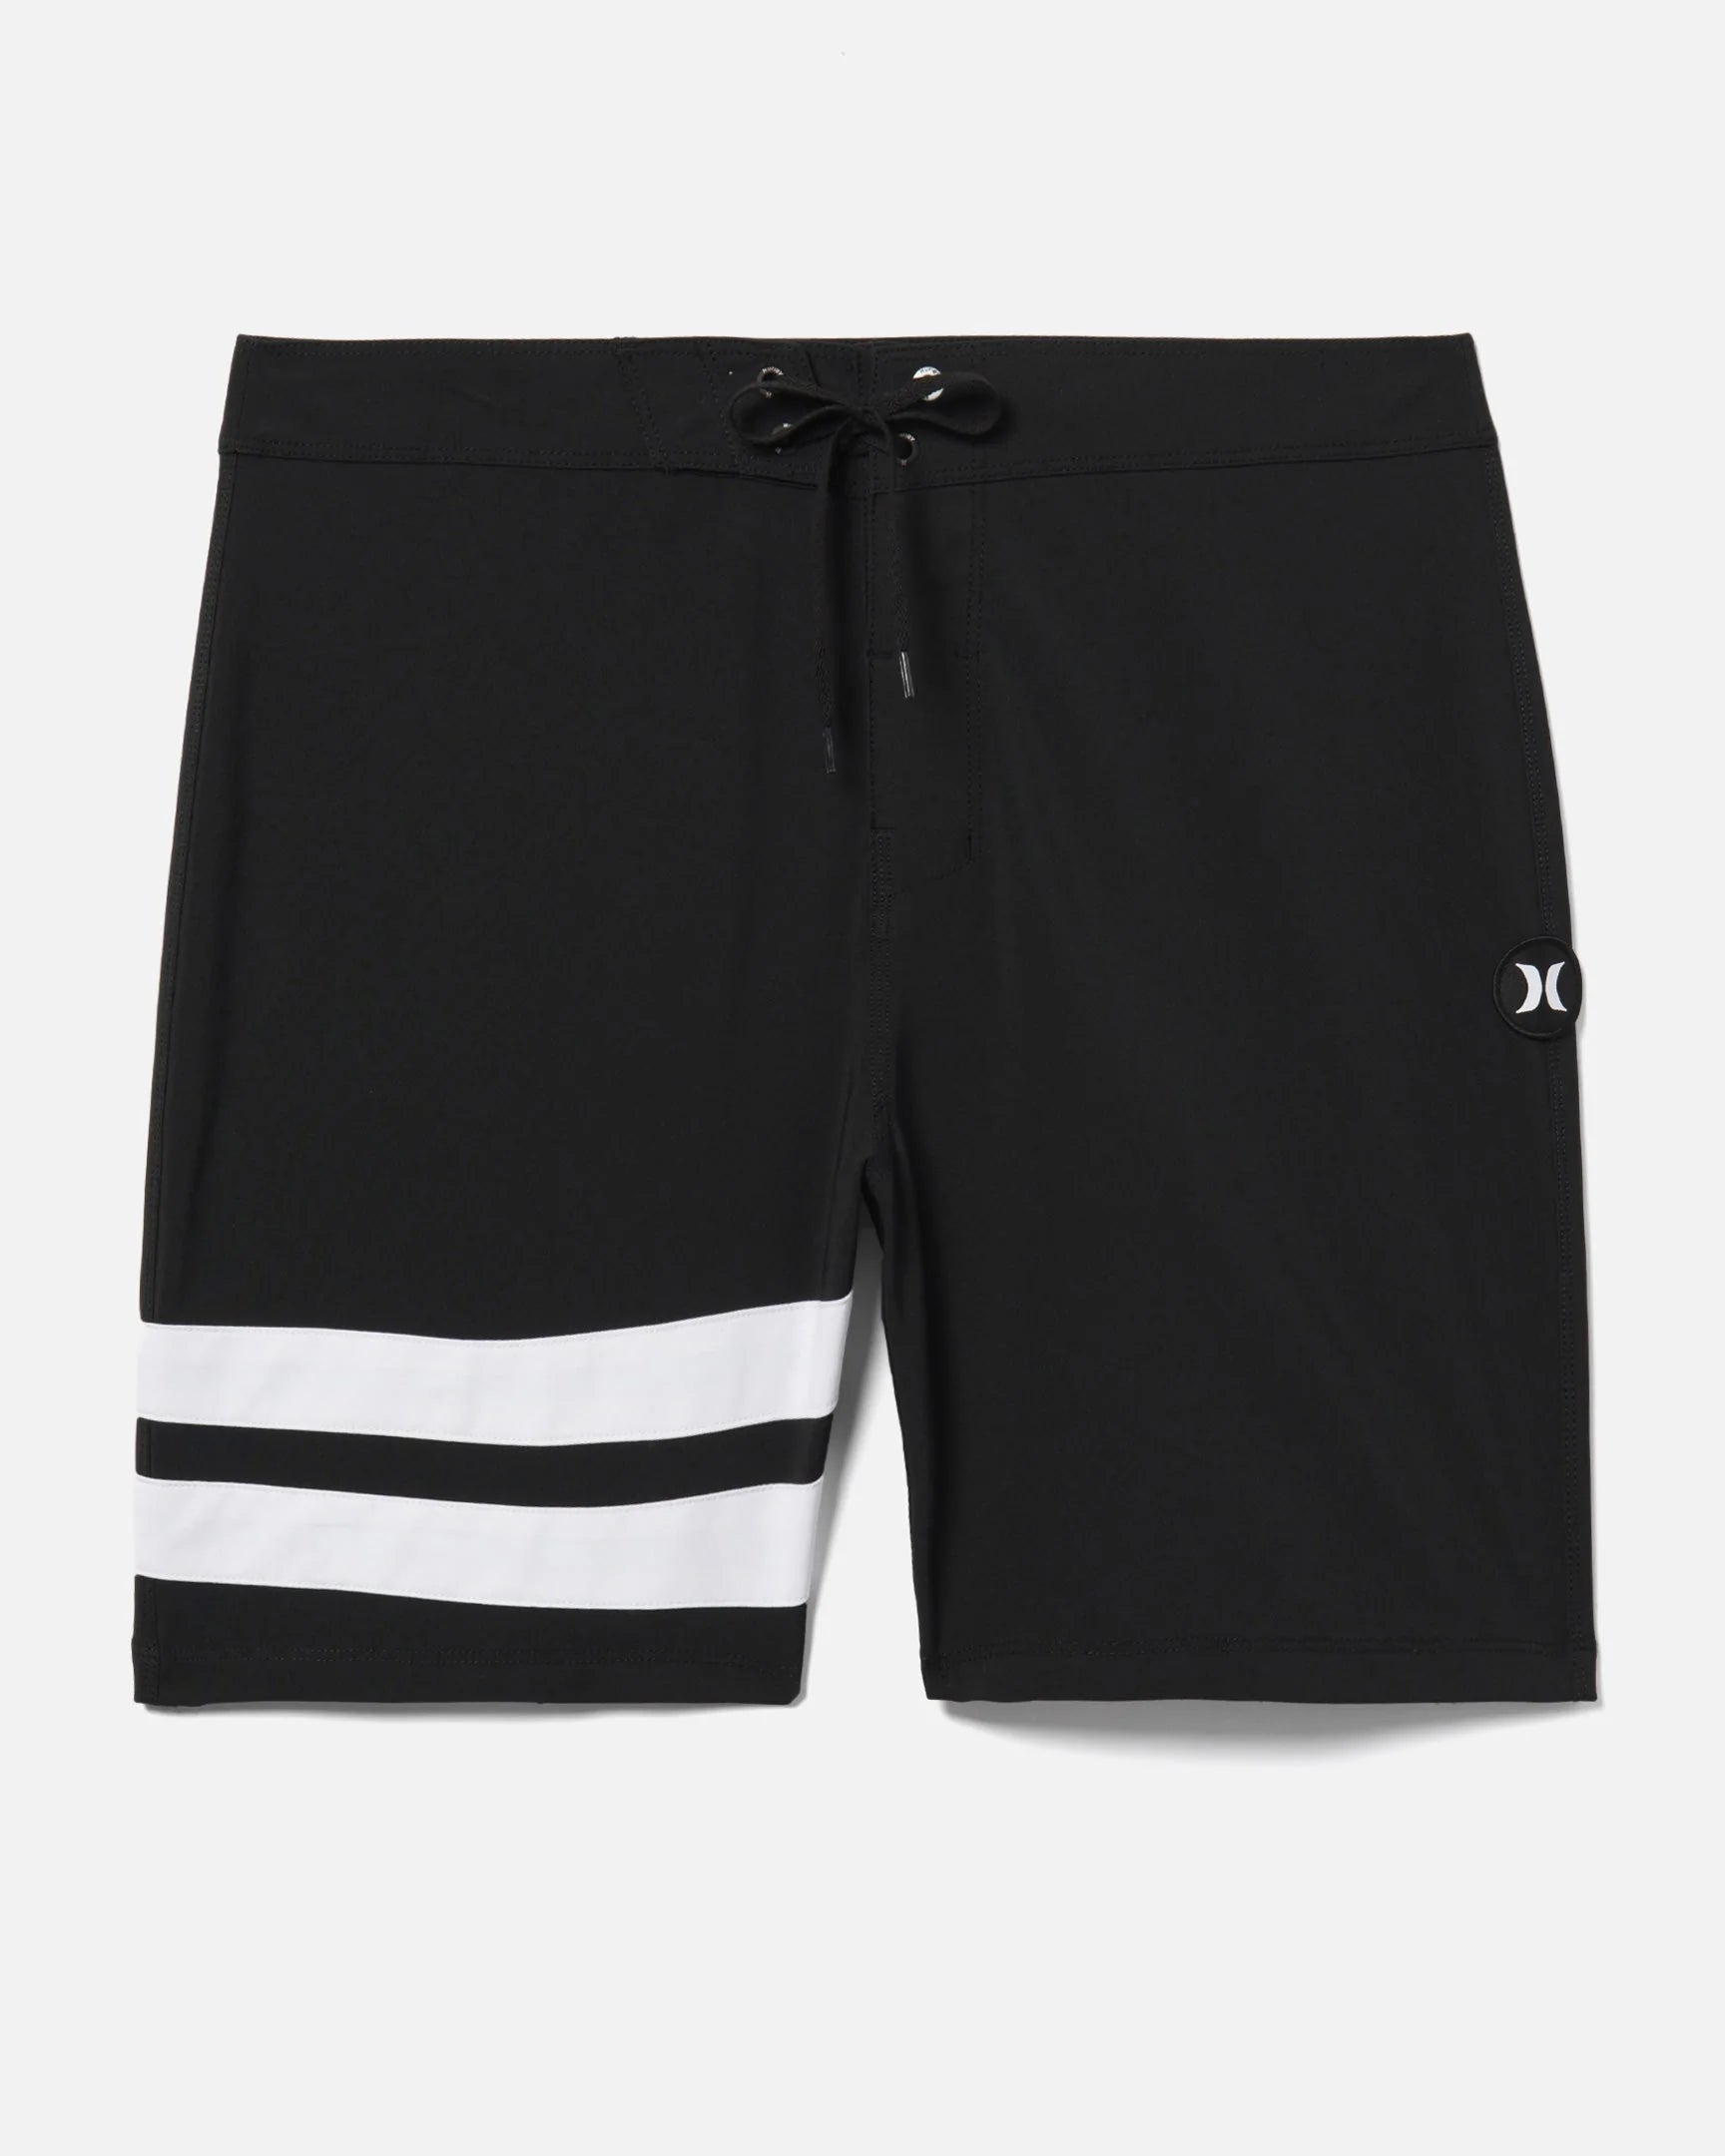 Hurley Boardshorts Block Party 18" Length - Two Stripes